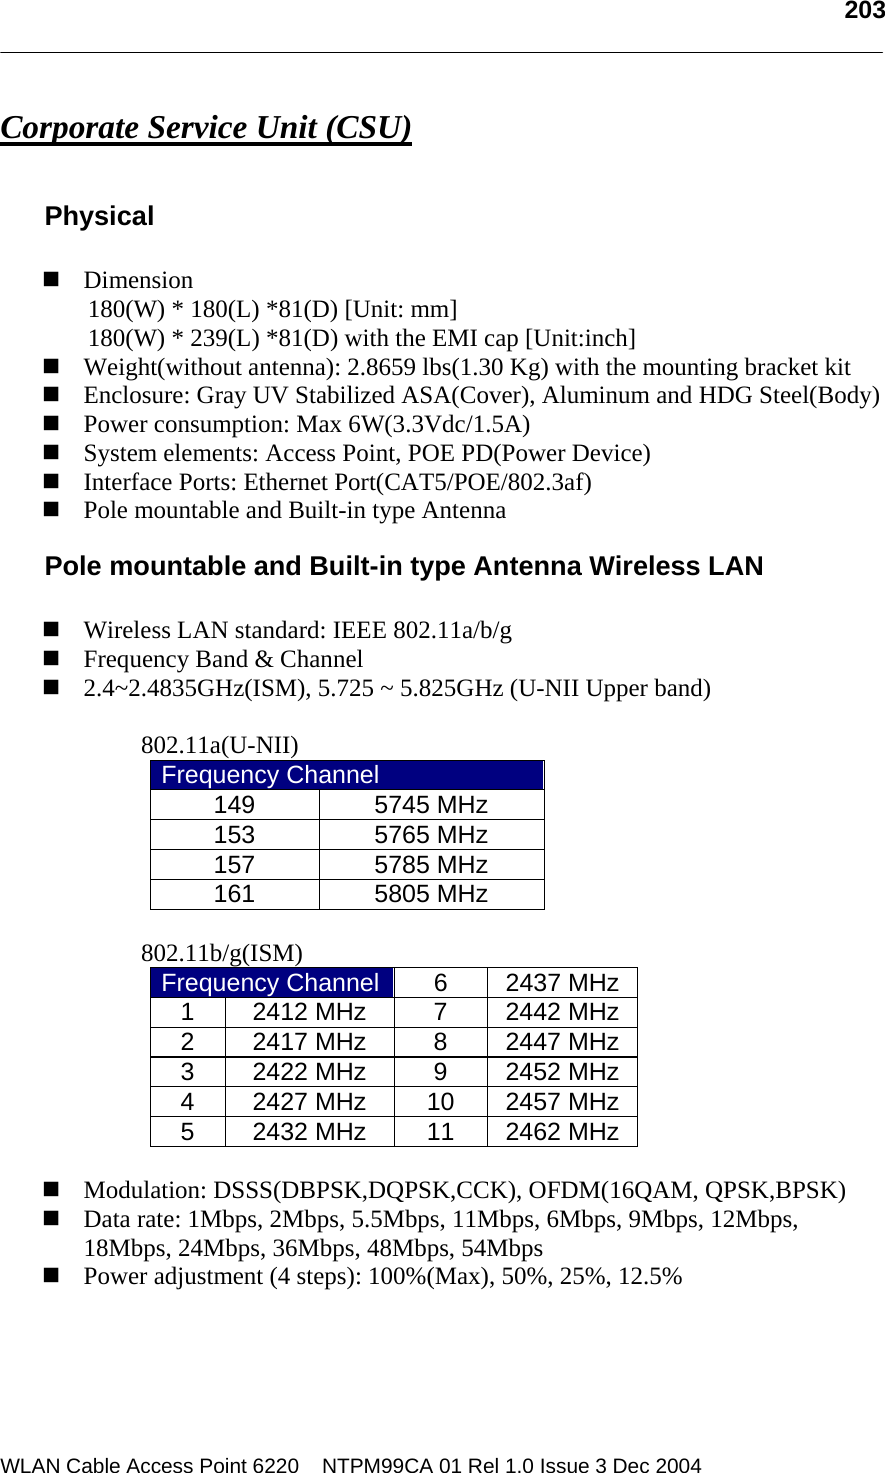   203  WLAN Cable Access Point 6220    NTPM99CA 01 Rel 1.0 Issue 3 Dec 2004 Corporate Service Unit (CSU)  Physical   Dimension 180(W) * 180(L) *81(D) [Unit: mm] 180(W) * 239(L) *81(D) with the EMI cap [Unit:inch]  Weight(without antenna): 2.8659 lbs(1.30 Kg) with the mounting bracket kit  Enclosure: Gray UV Stabilized ASA(Cover), Aluminum and HDG Steel(Body)  Power consumption: Max 6W(3.3Vdc/1.5A)  System elements: Access Point, POE PD(Power Device)  Interface Ports: Ethernet Port(CAT5/POE/802.3af)  Pole mountable and Built-in type Antenna  Pole mountable and Built-in type Antenna Wireless LAN     Wireless LAN standard: IEEE 802.11a/b/g  Frequency Band &amp; Channel  2.4~2.4835GHz(ISM), 5.725 ~ 5.825GHz (U-NII Upper band)  802.11a(U-NII) Frequency Channel 149 5745 MHz 153 5765 MHz 157 5785 MHz 161 5805 MHz  802.11b/g(ISM) Frequency Channel 6 2437 MHz1 2412 MHz  7 2442 MHz2 2417 MHz  8 2447 MHz3 2422 MHz  9 2452 MHz4  2427 MHz  10  2457 MHz5  2432 MHz  11  2462 MHz  Modulation: DSSS(DBPSK,DQPSK,CCK), OFDM(16QAM, QPSK,BPSK)   Data rate: 1Mbps, 2Mbps, 5.5Mbps, 11Mbps, 6Mbps, 9Mbps, 12Mbps, 18Mbps, 24Mbps, 36Mbps, 48Mbps, 54Mbps  Power adjustment (4 steps): 100%(Max), 50%, 25%, 12.5%  